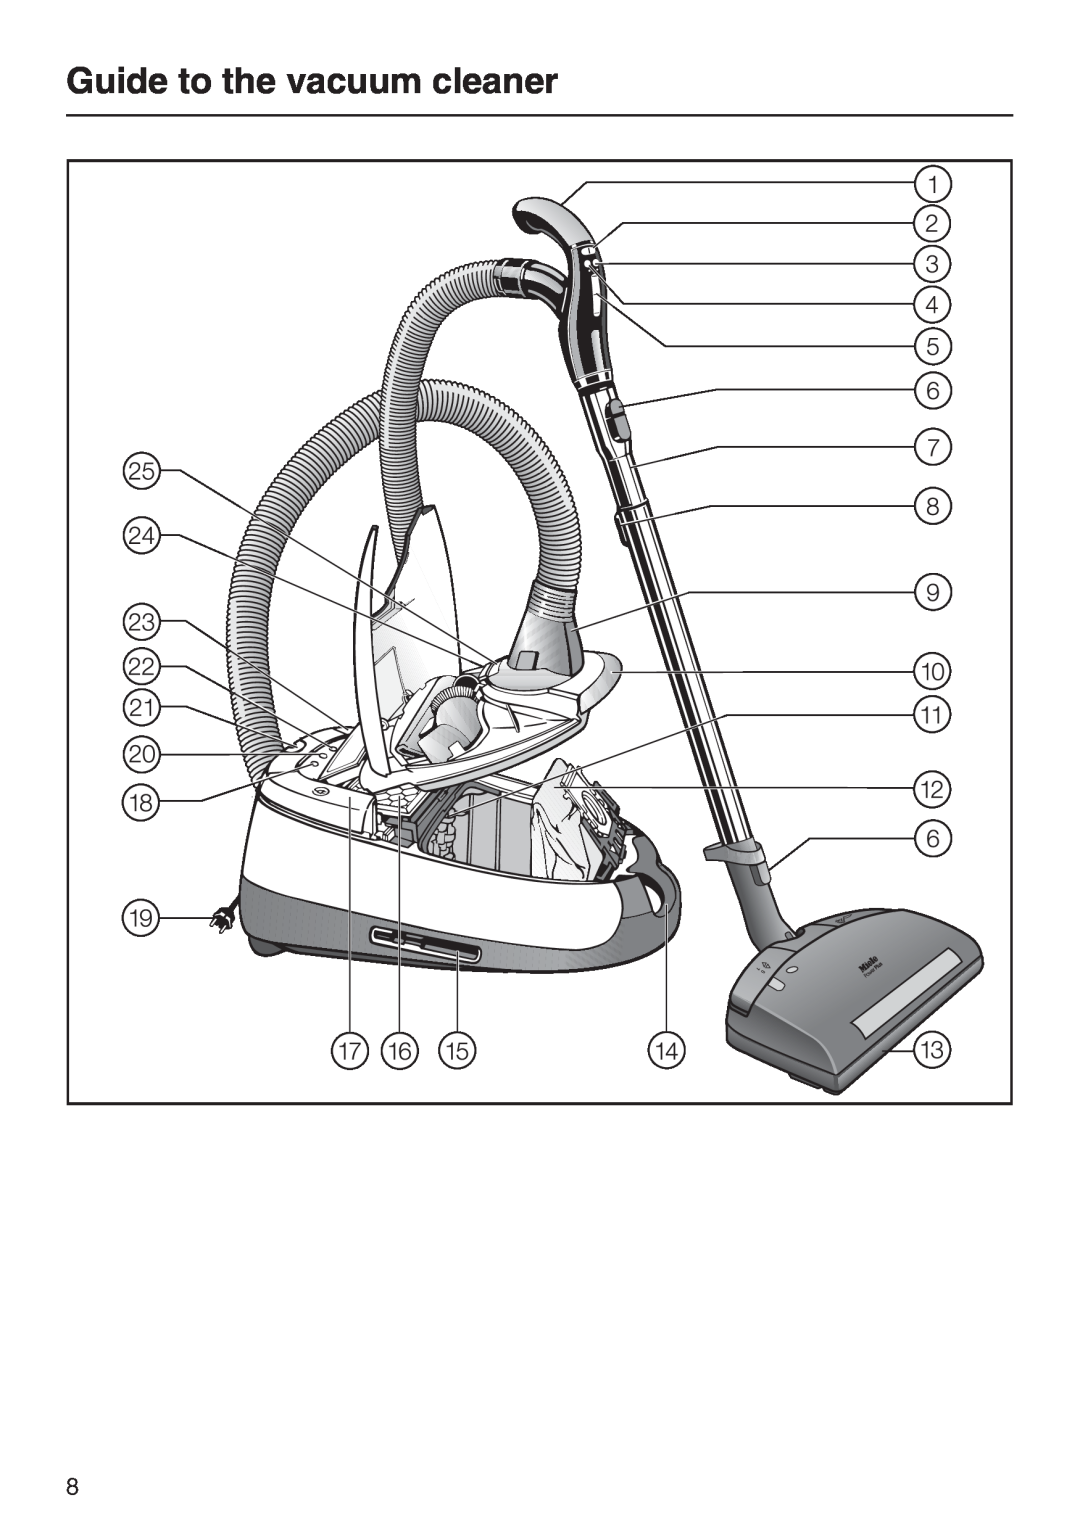 Miele S 5980 operating instructions Guide to the vacuum cleaner 